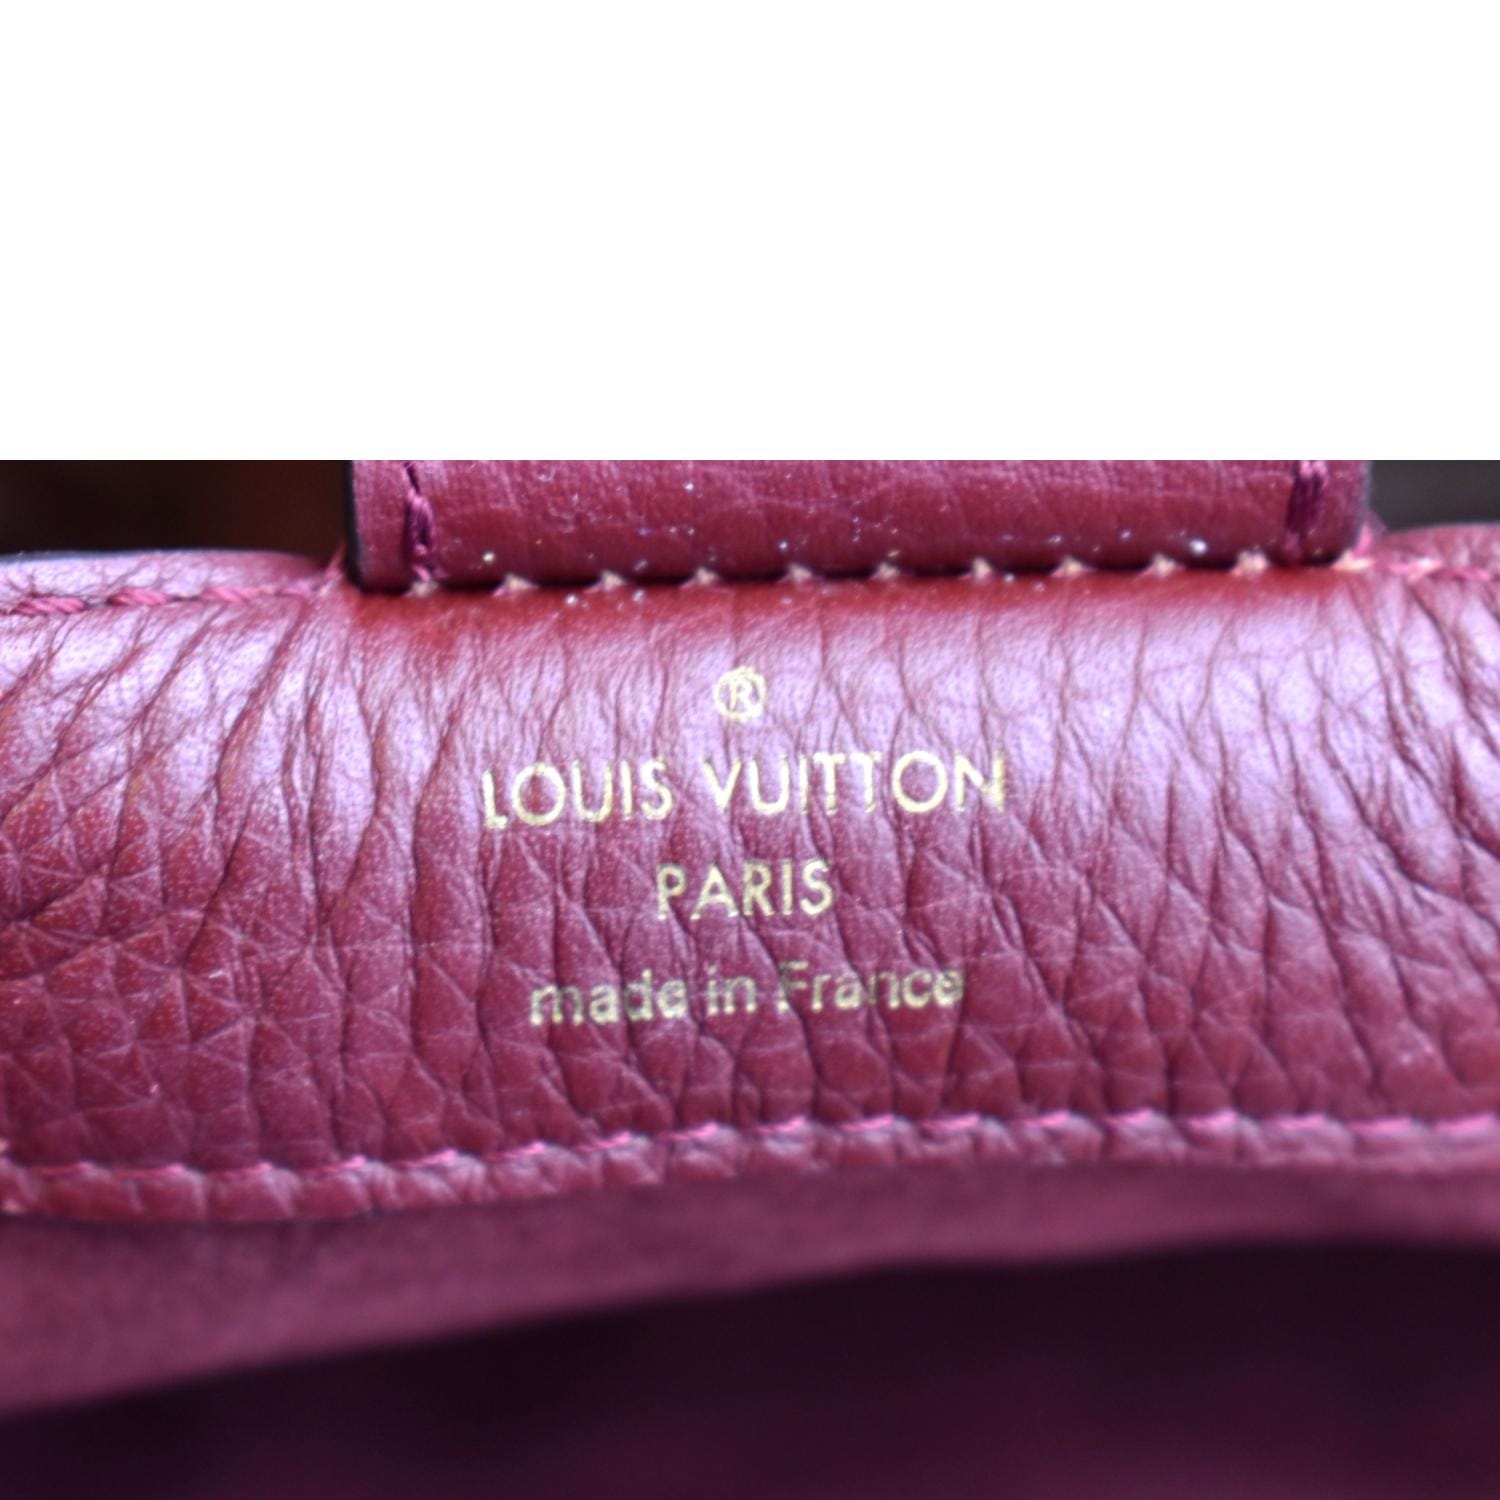 Brittany leather handbag Louis Vuitton Brown in Leather - 31833320